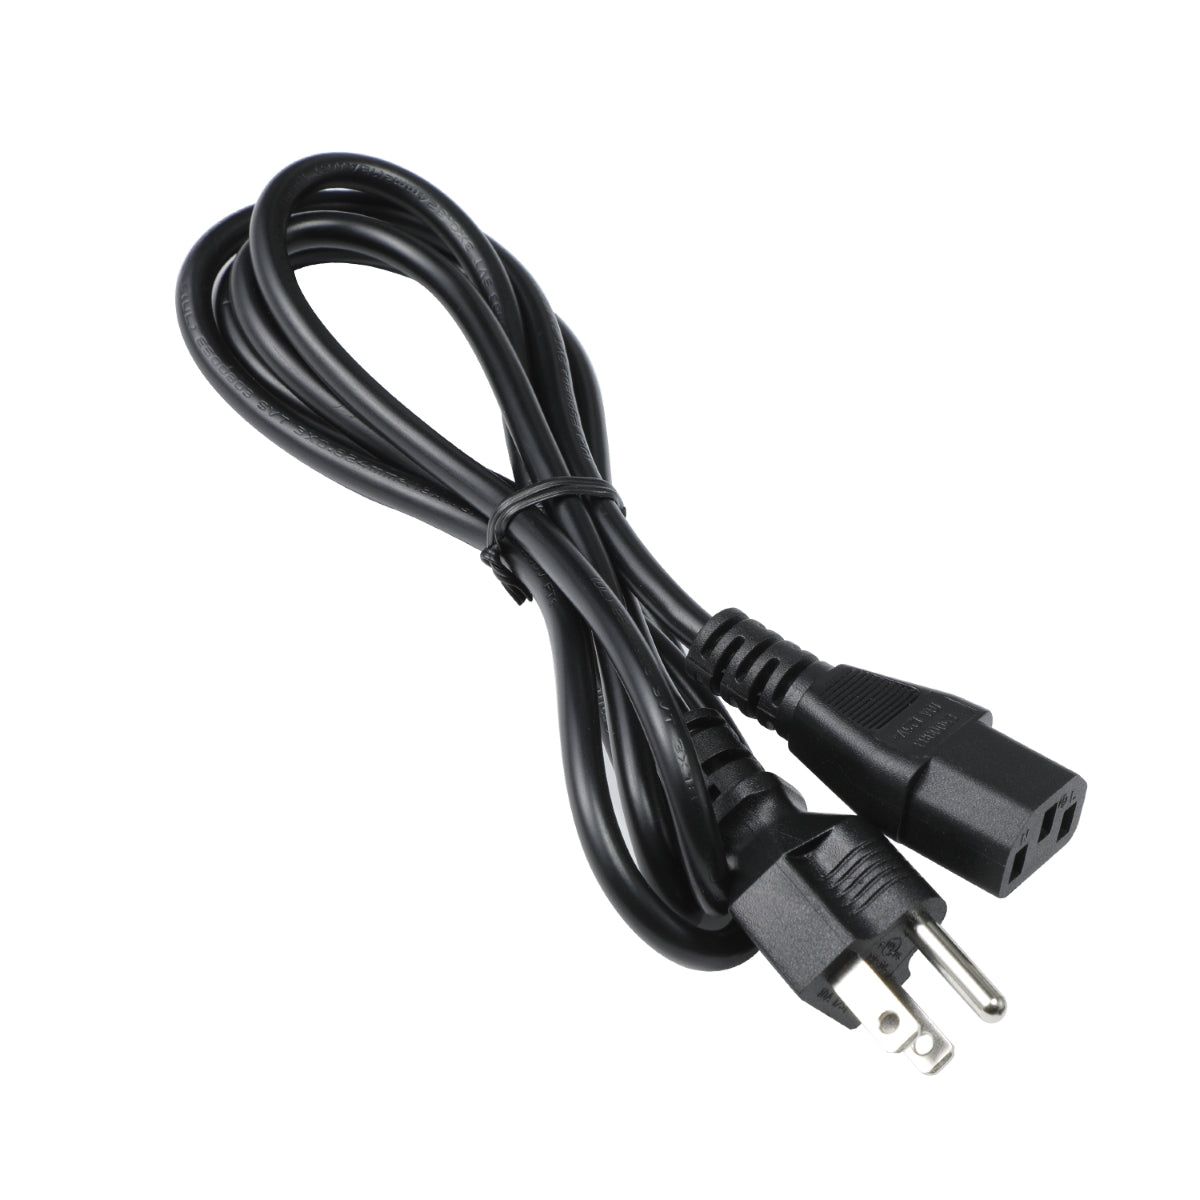 Power Cable for Philips 559M1RYV 4K Display.